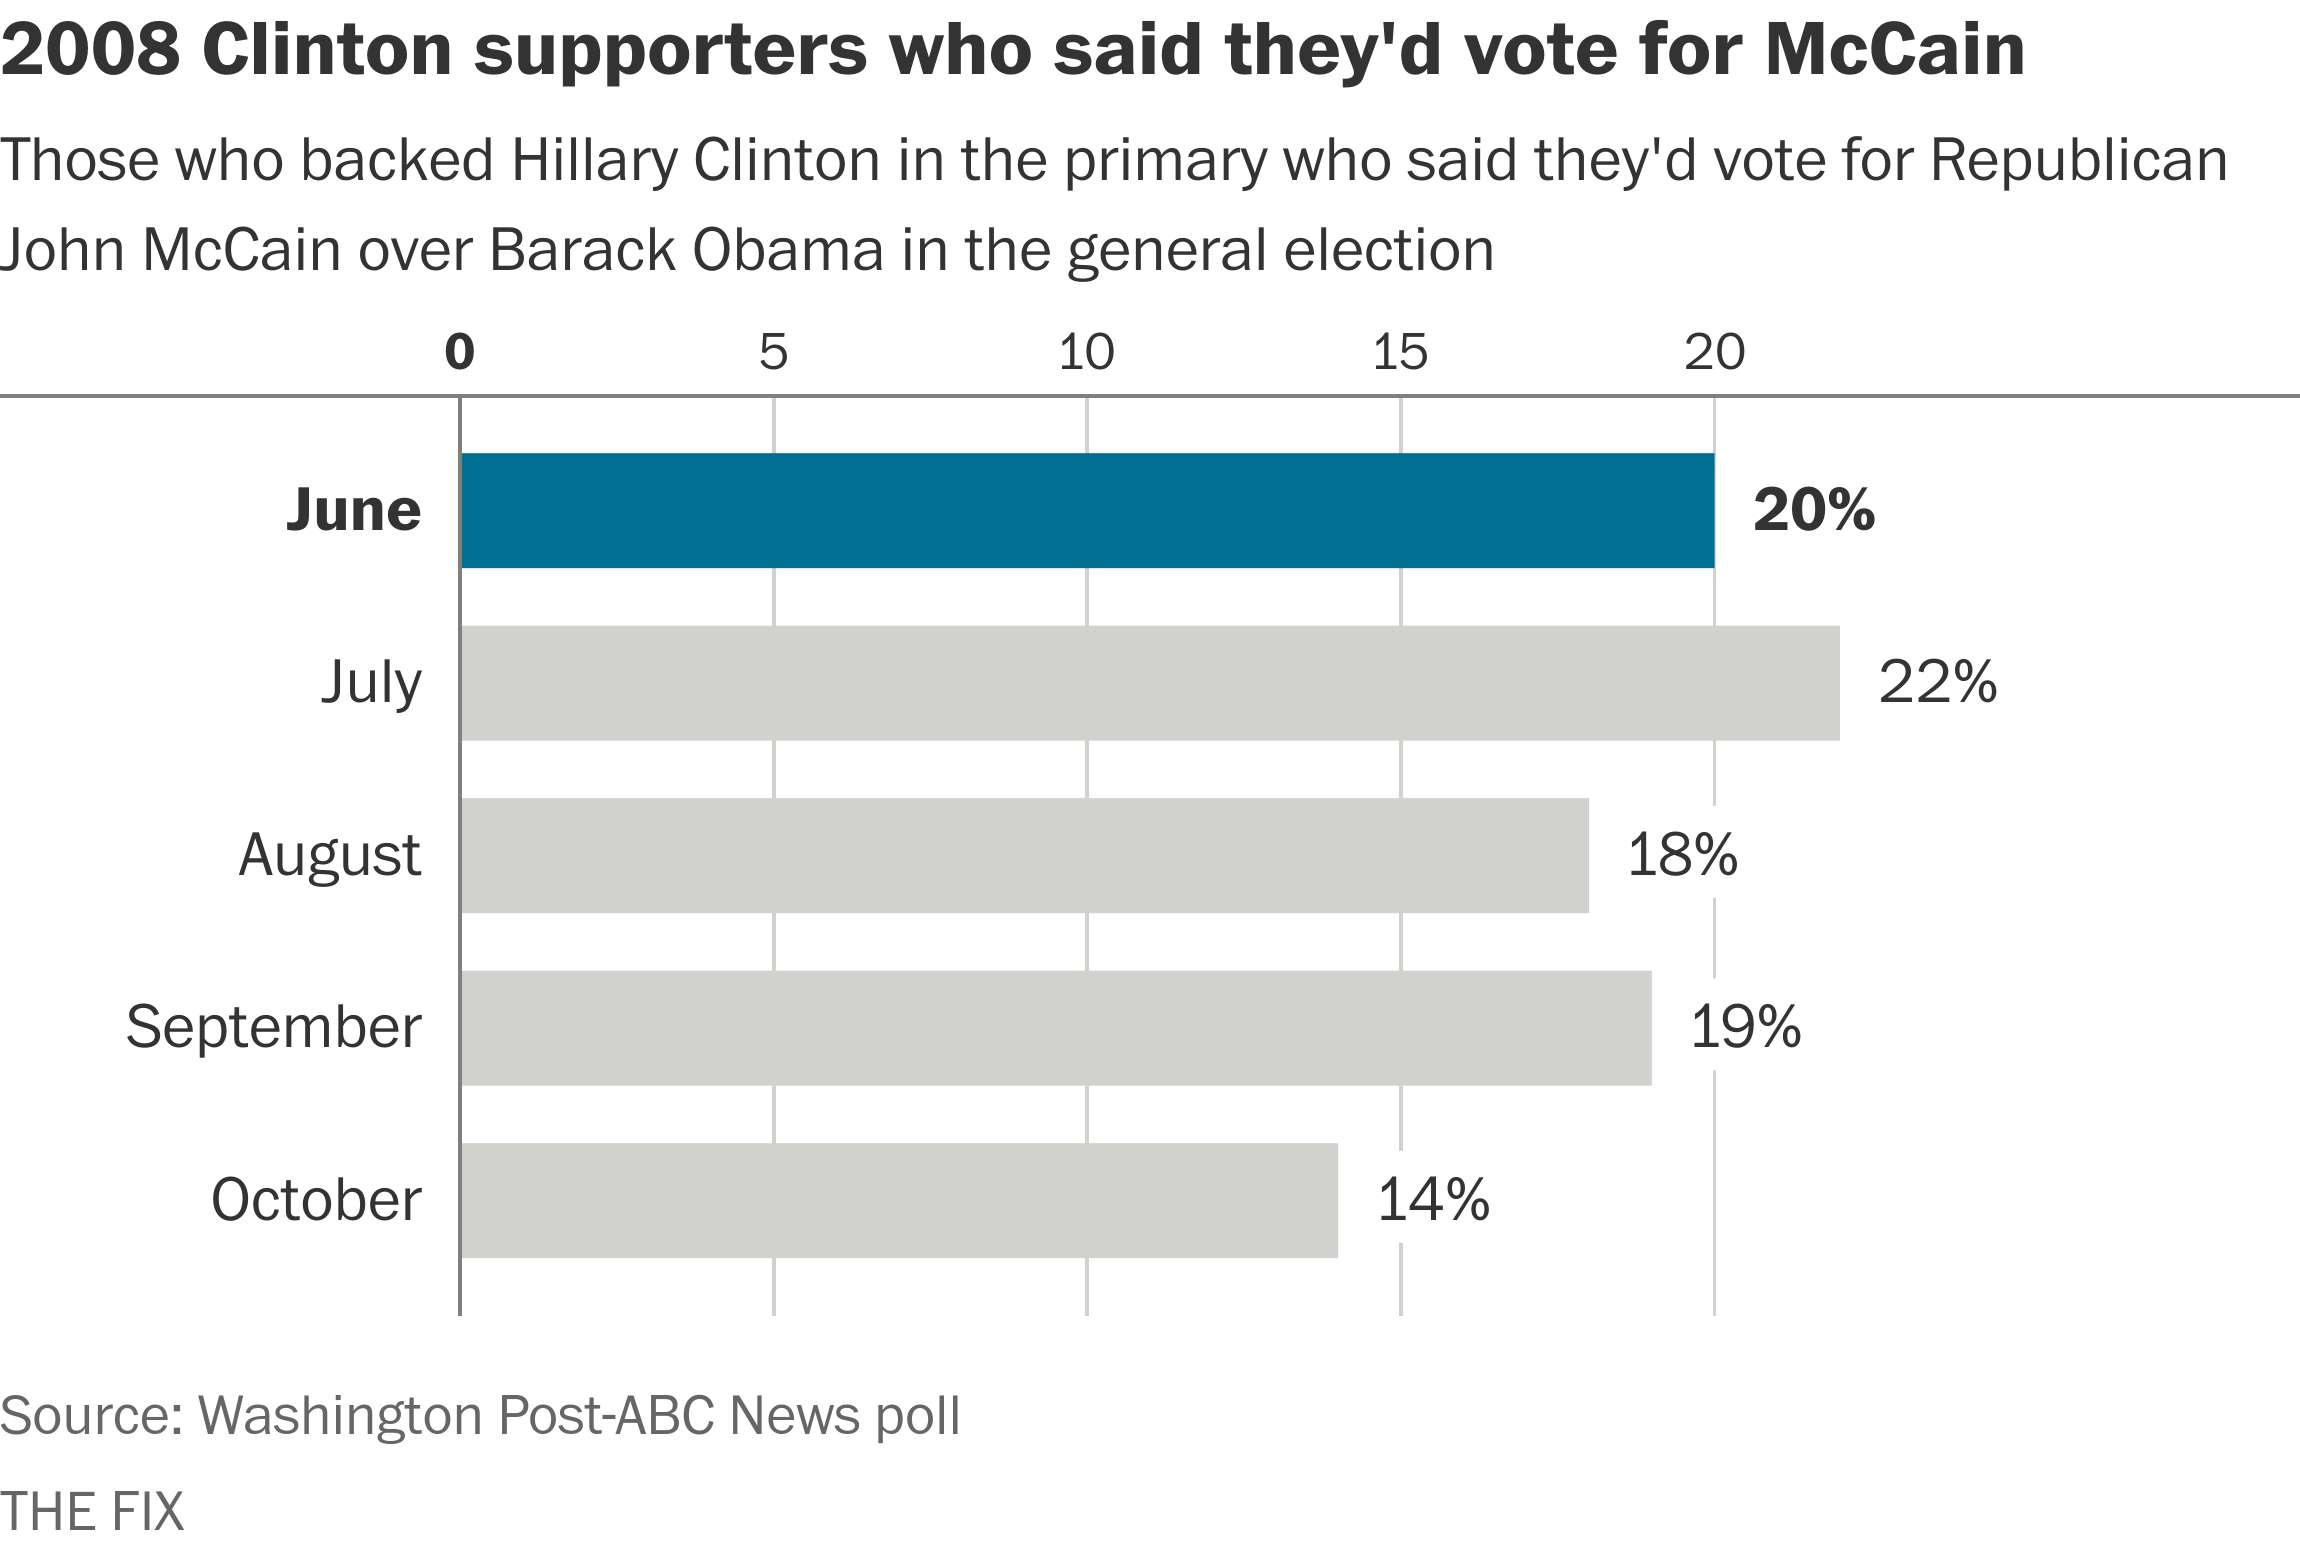 The number of Clinton supporters that said they'd back John McCain in 2008. 